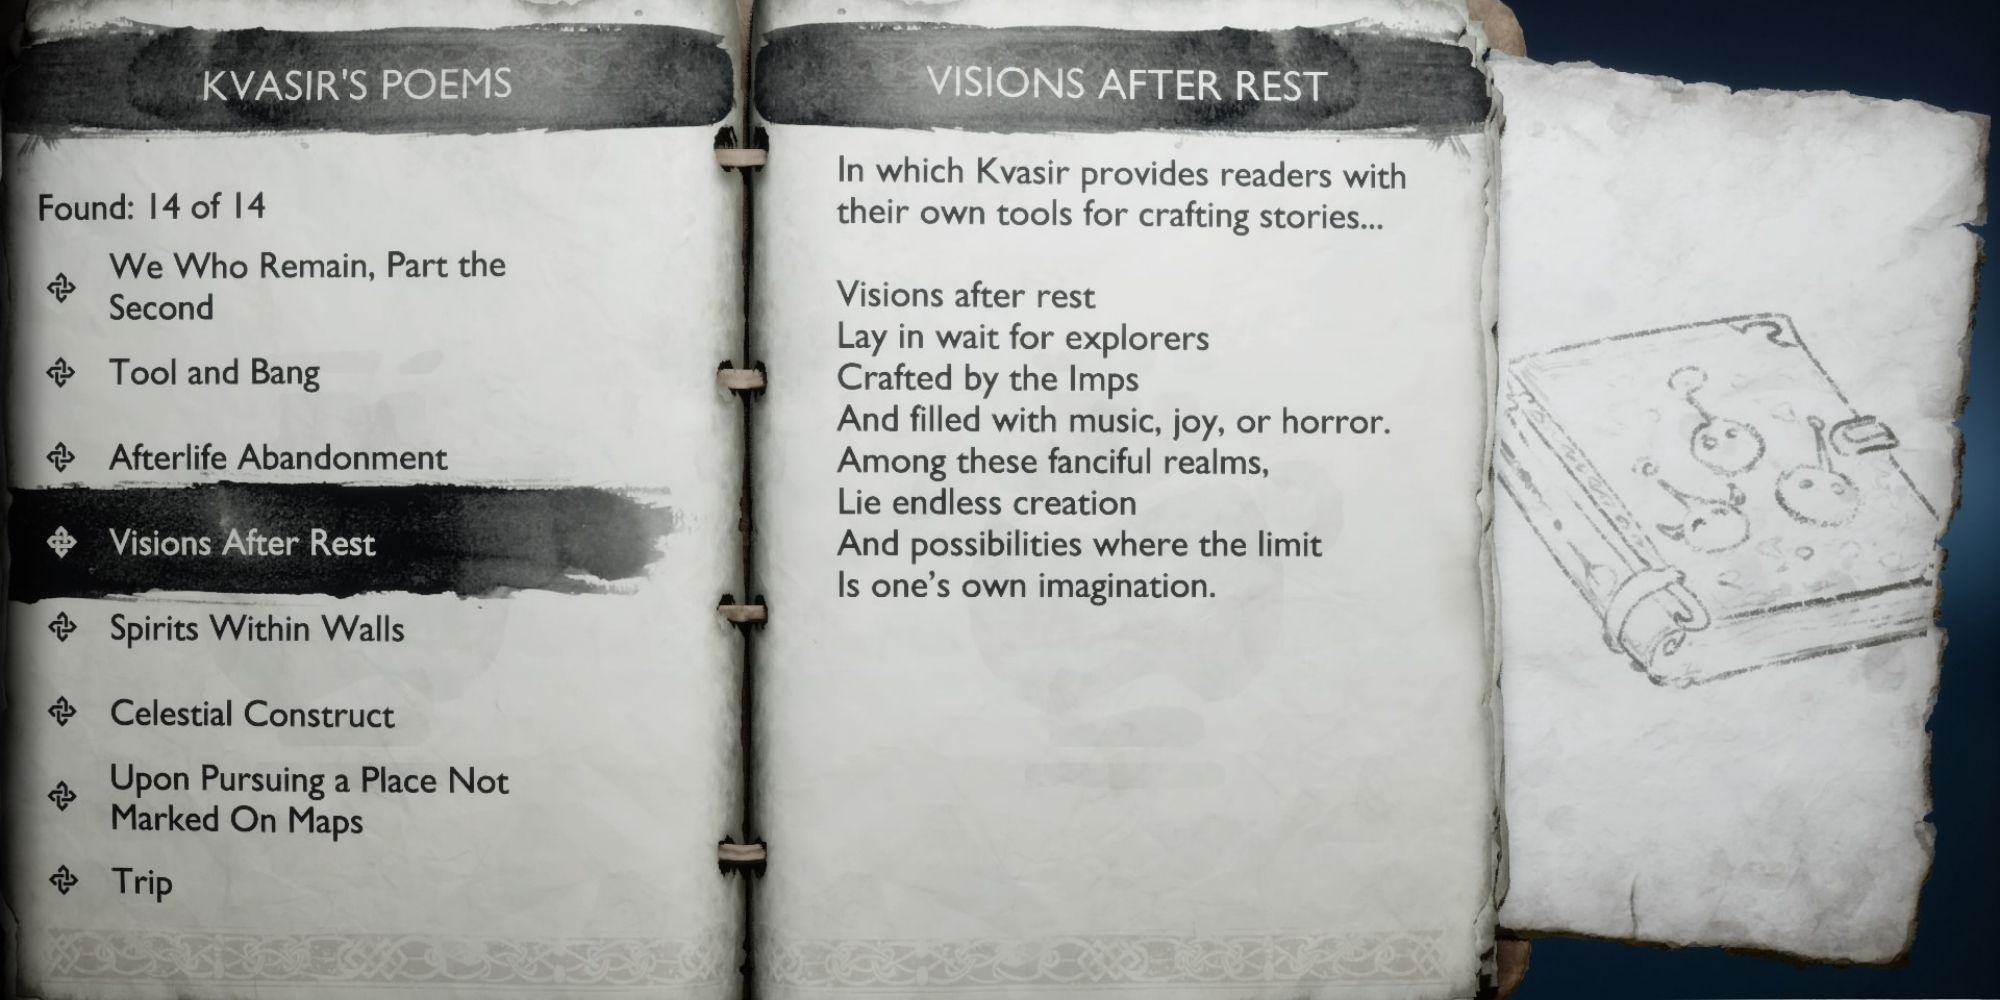 Krato's journal open to the page about Visions after Rest